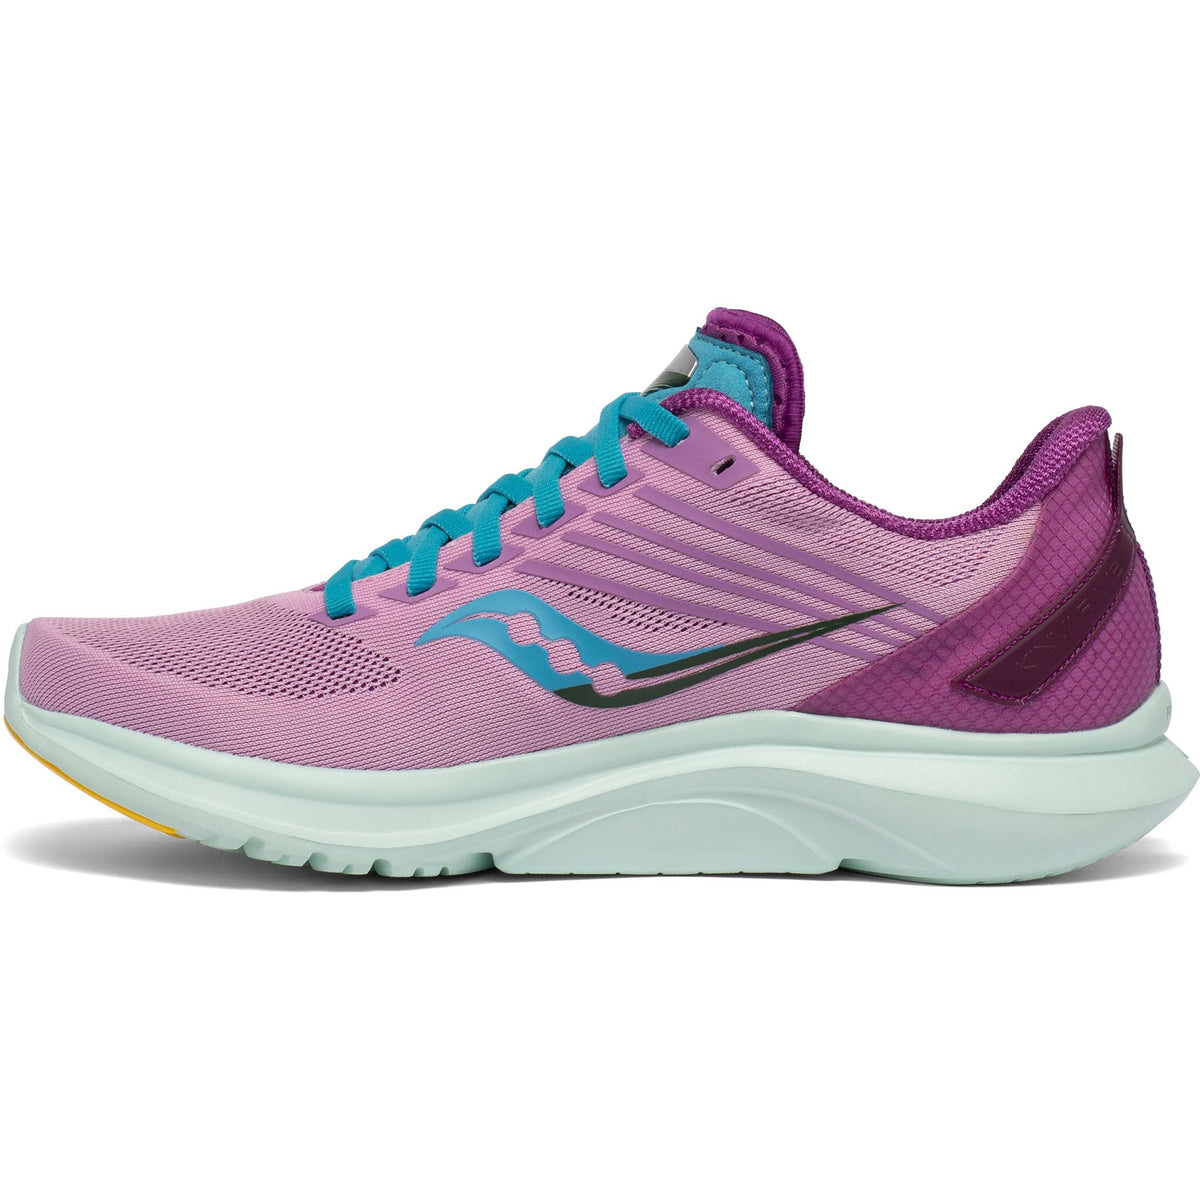 Saucony Kinvara 12 chaussures de course a pied femme Future pink lateral